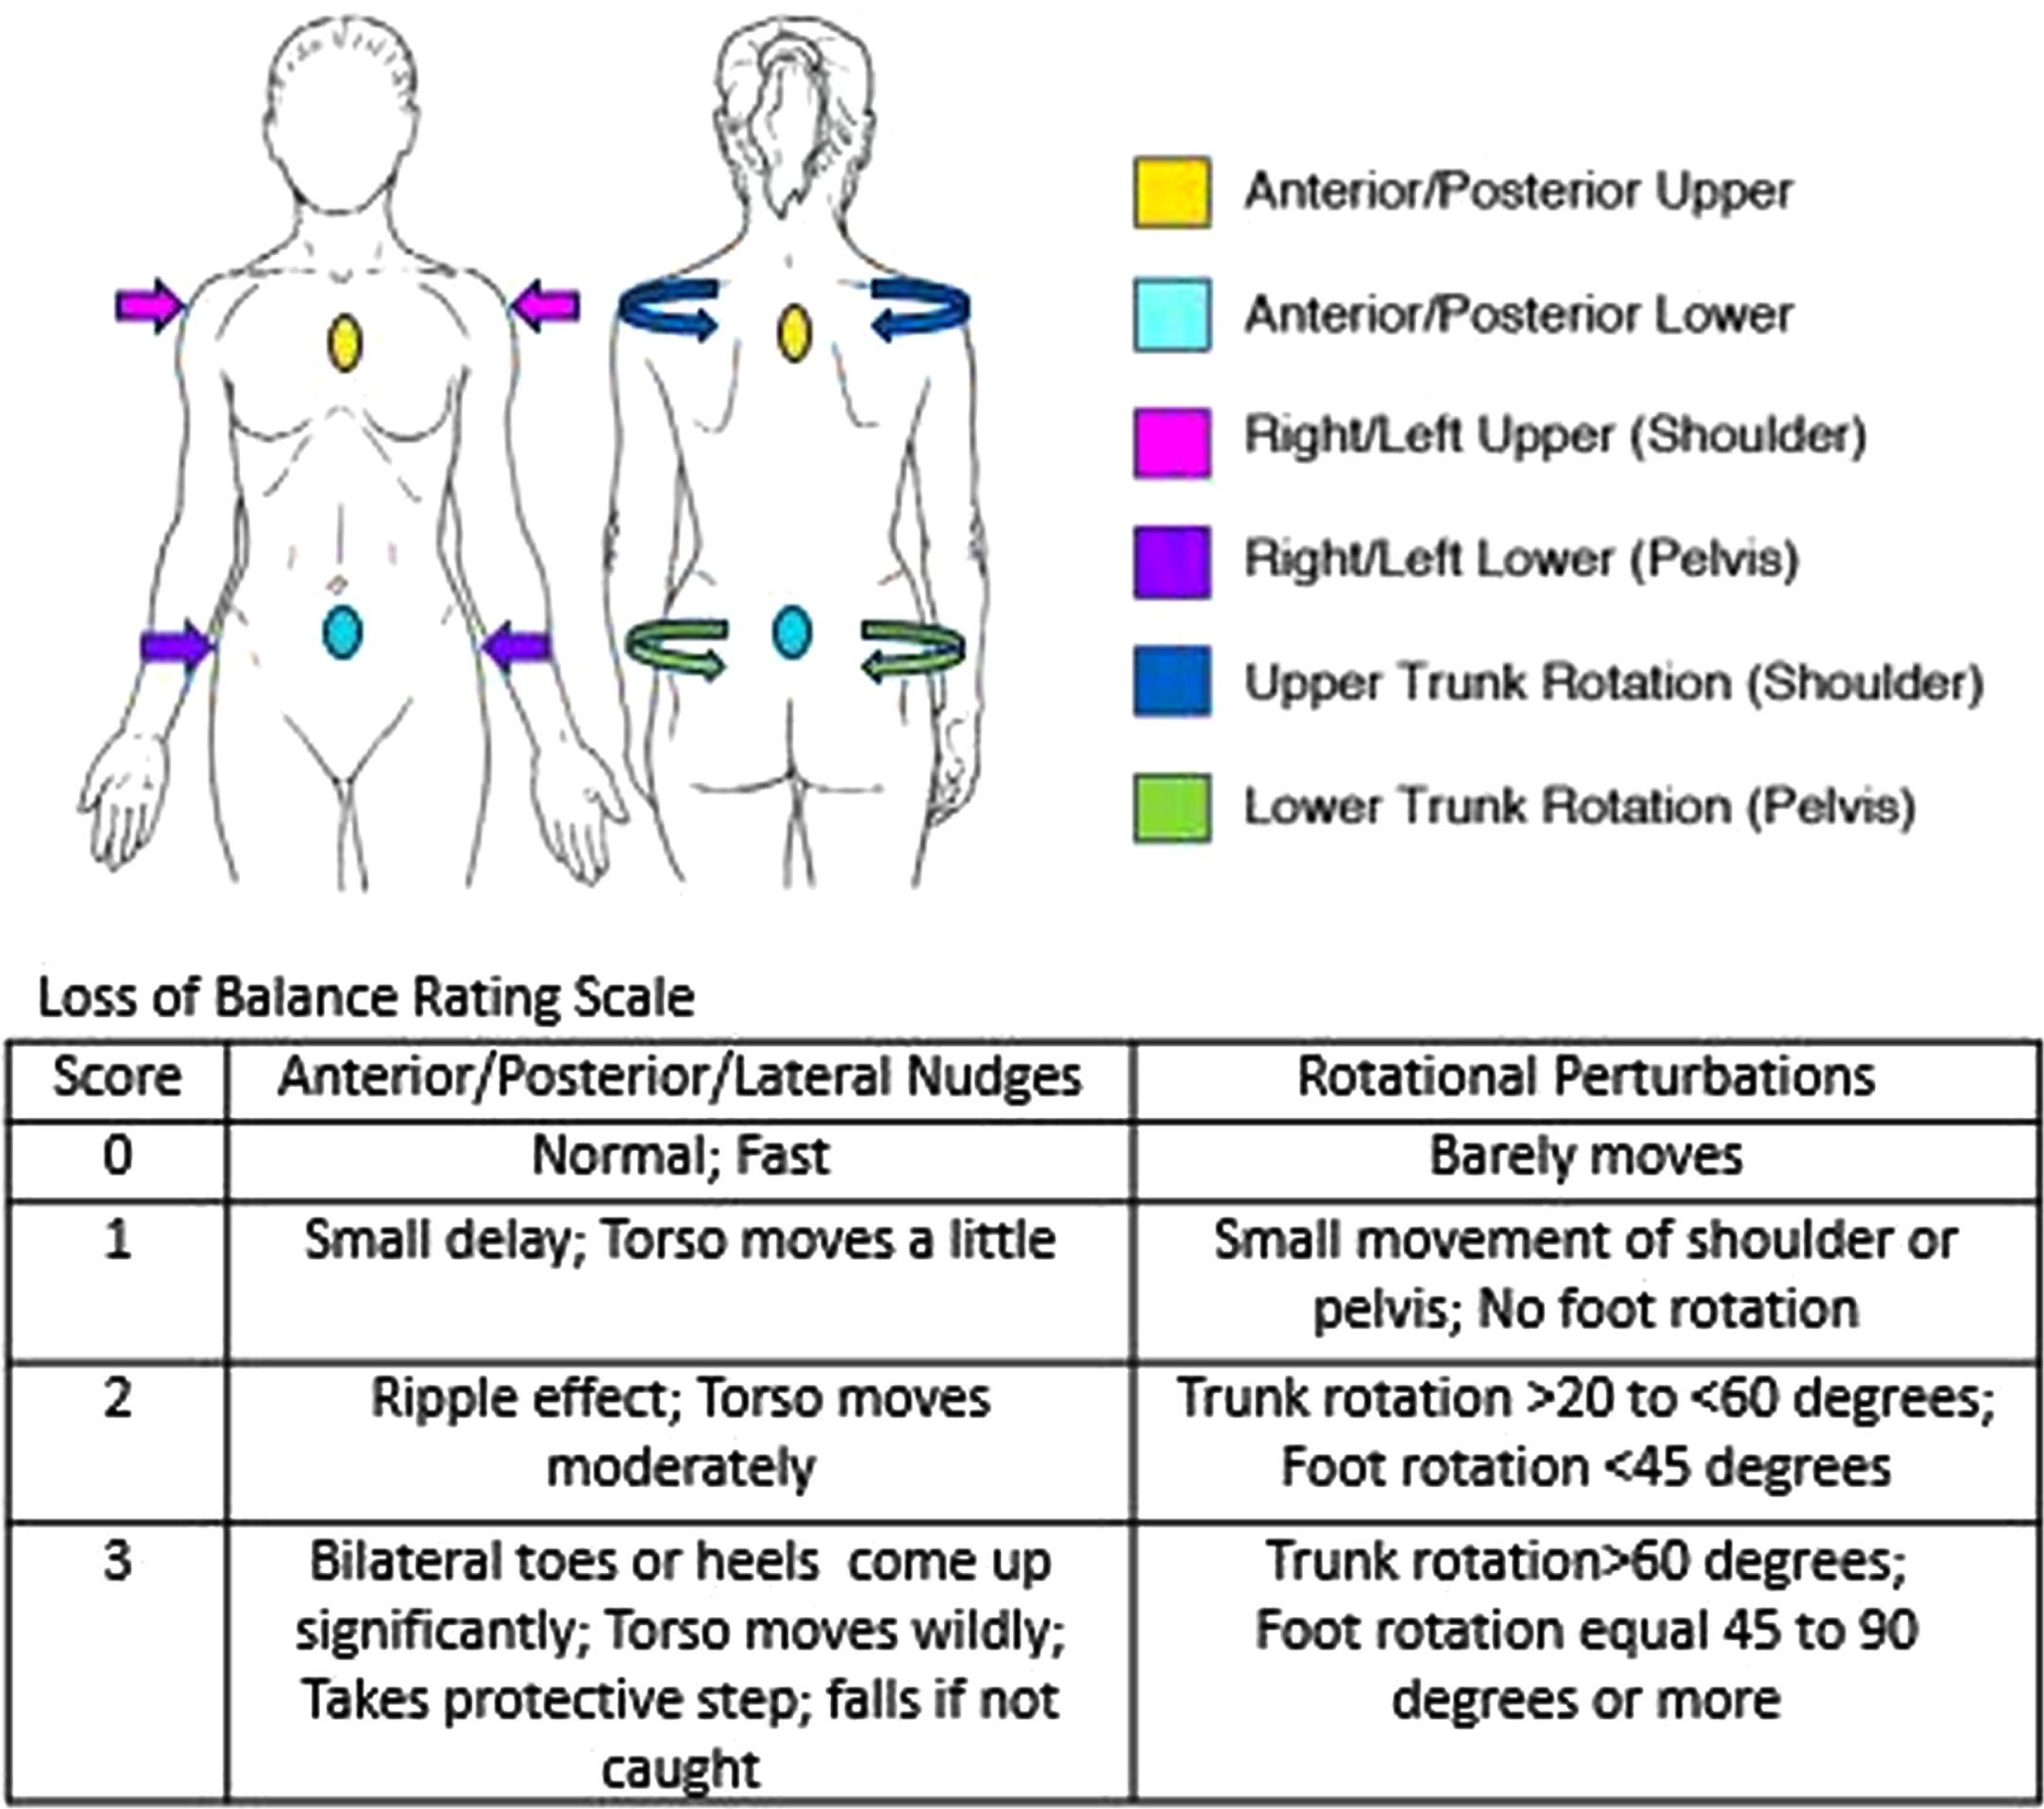 Loss of balance assessment and rating scale. Locations and directions of the standardized set of perturbations includes nudges and resisted rotations.